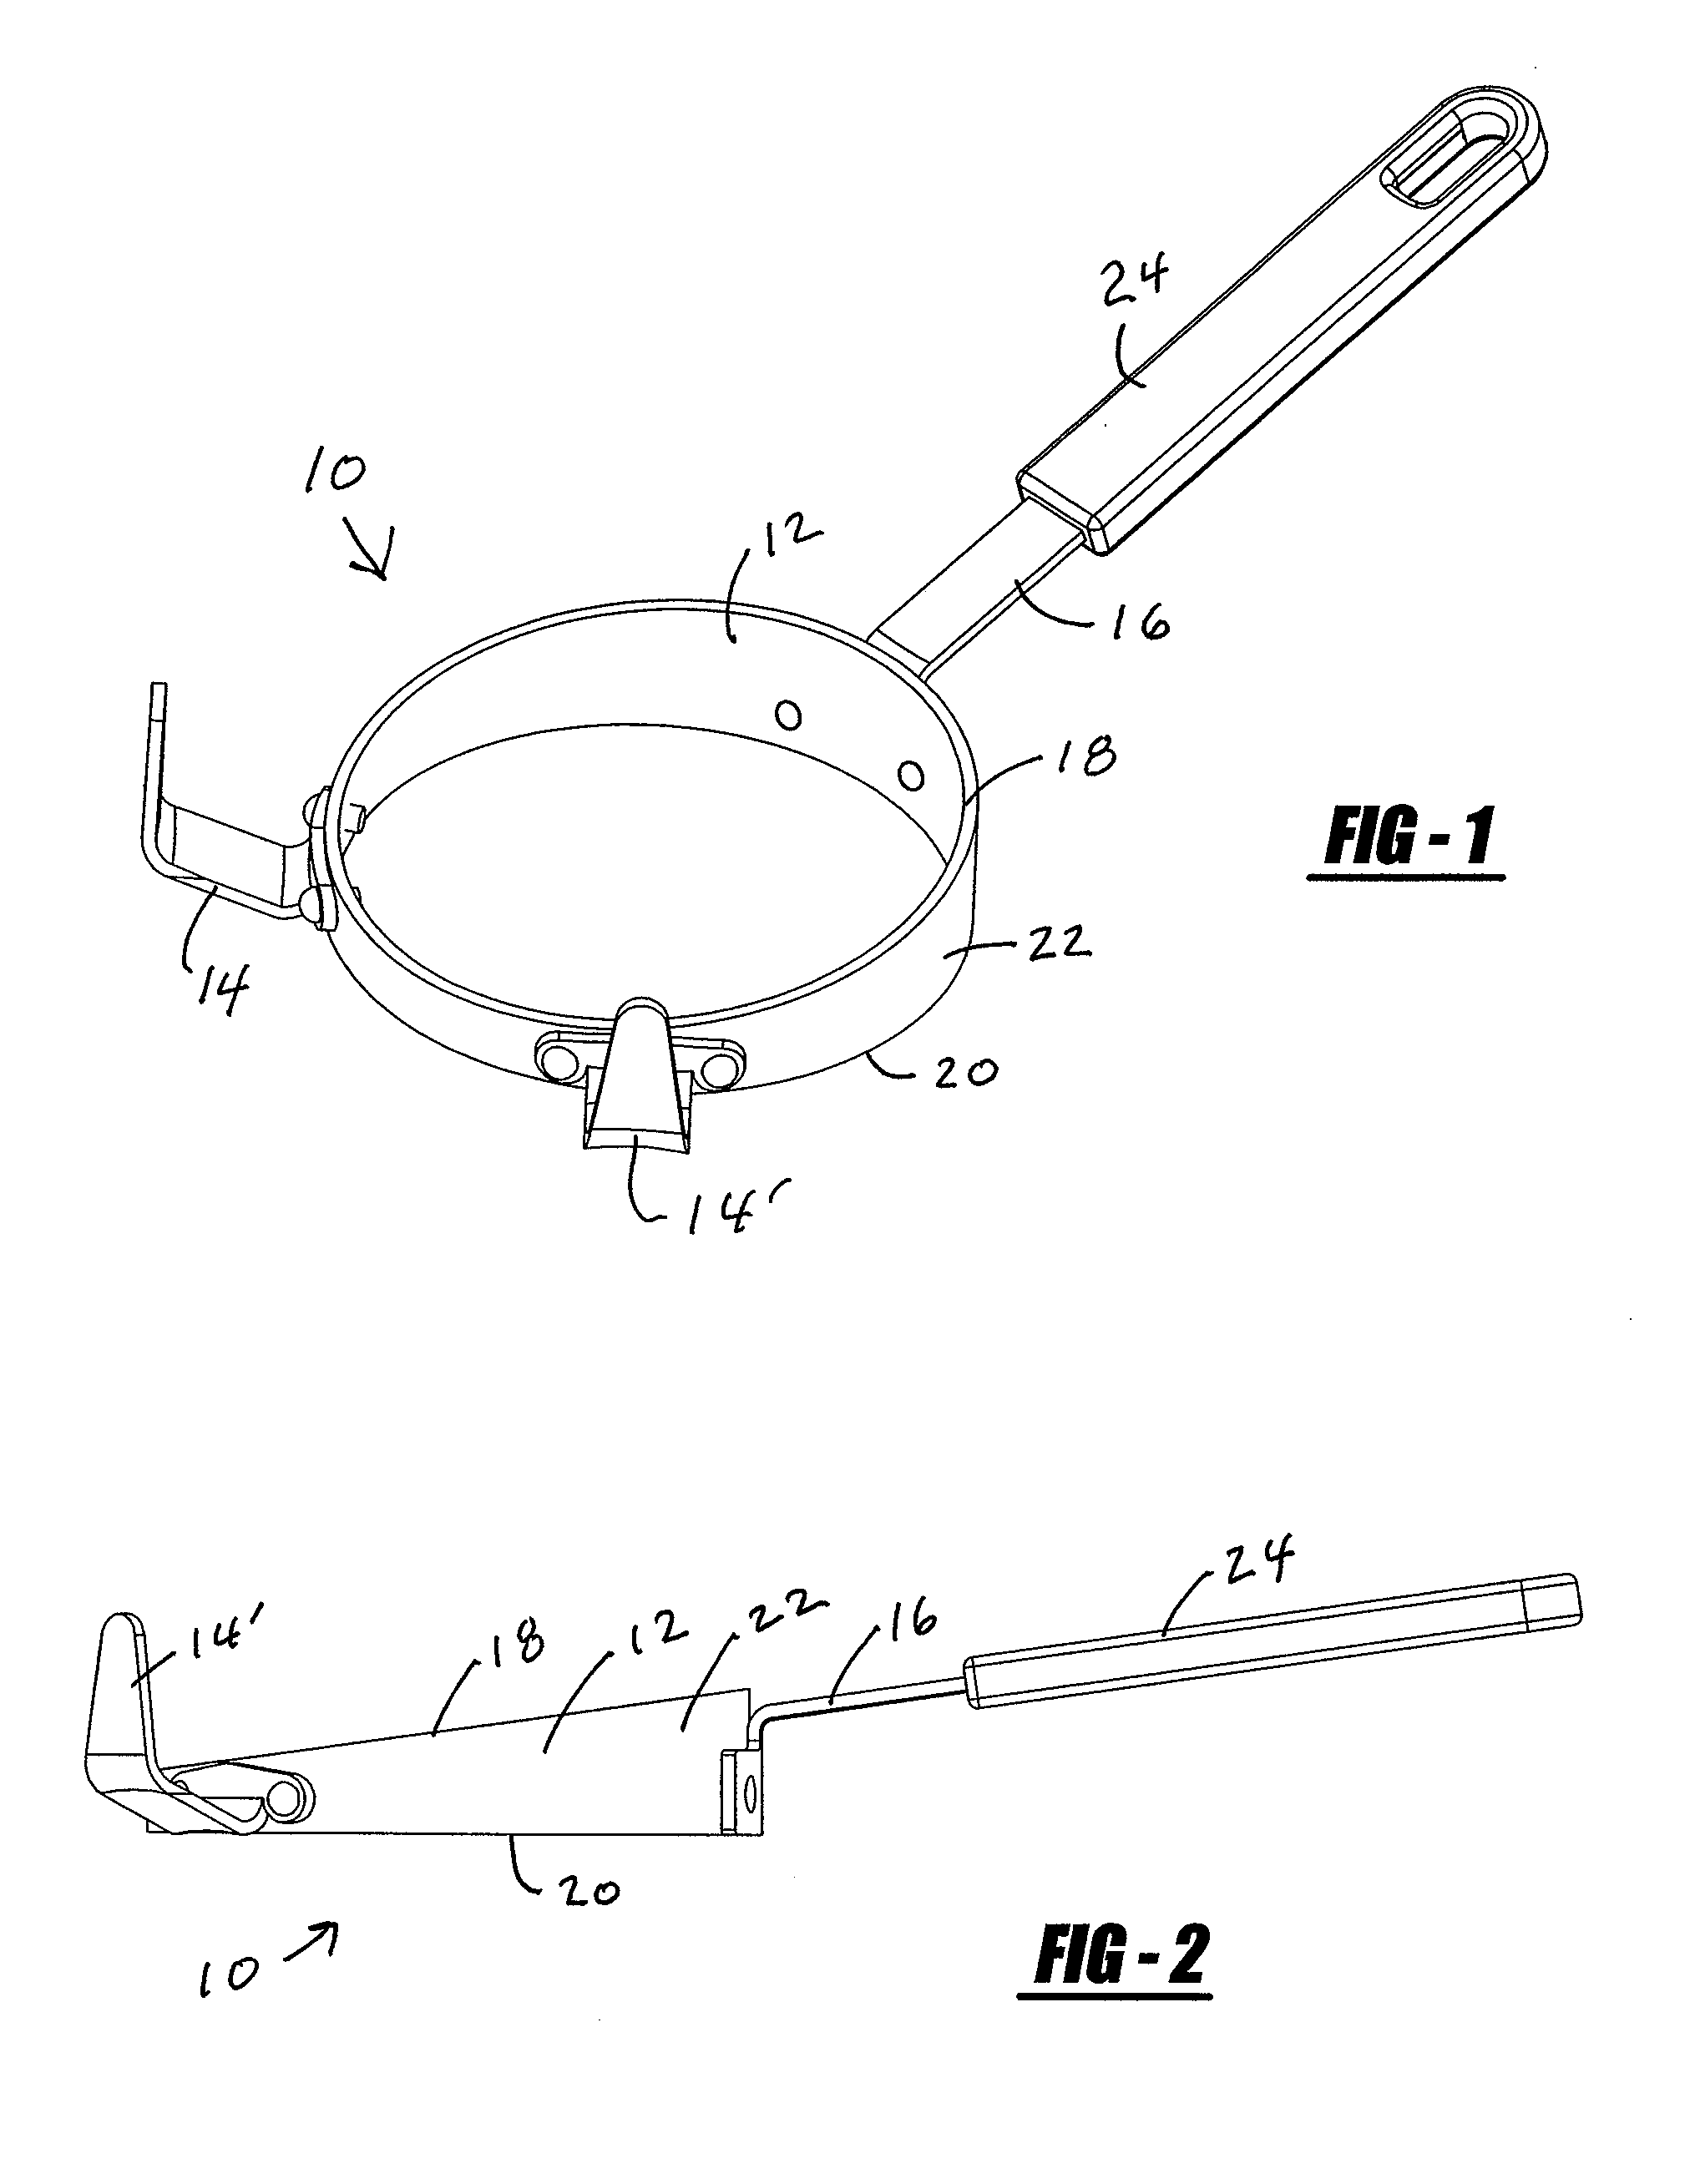 System and method for diverting liquids from foodstuff during preparation in a frying pan